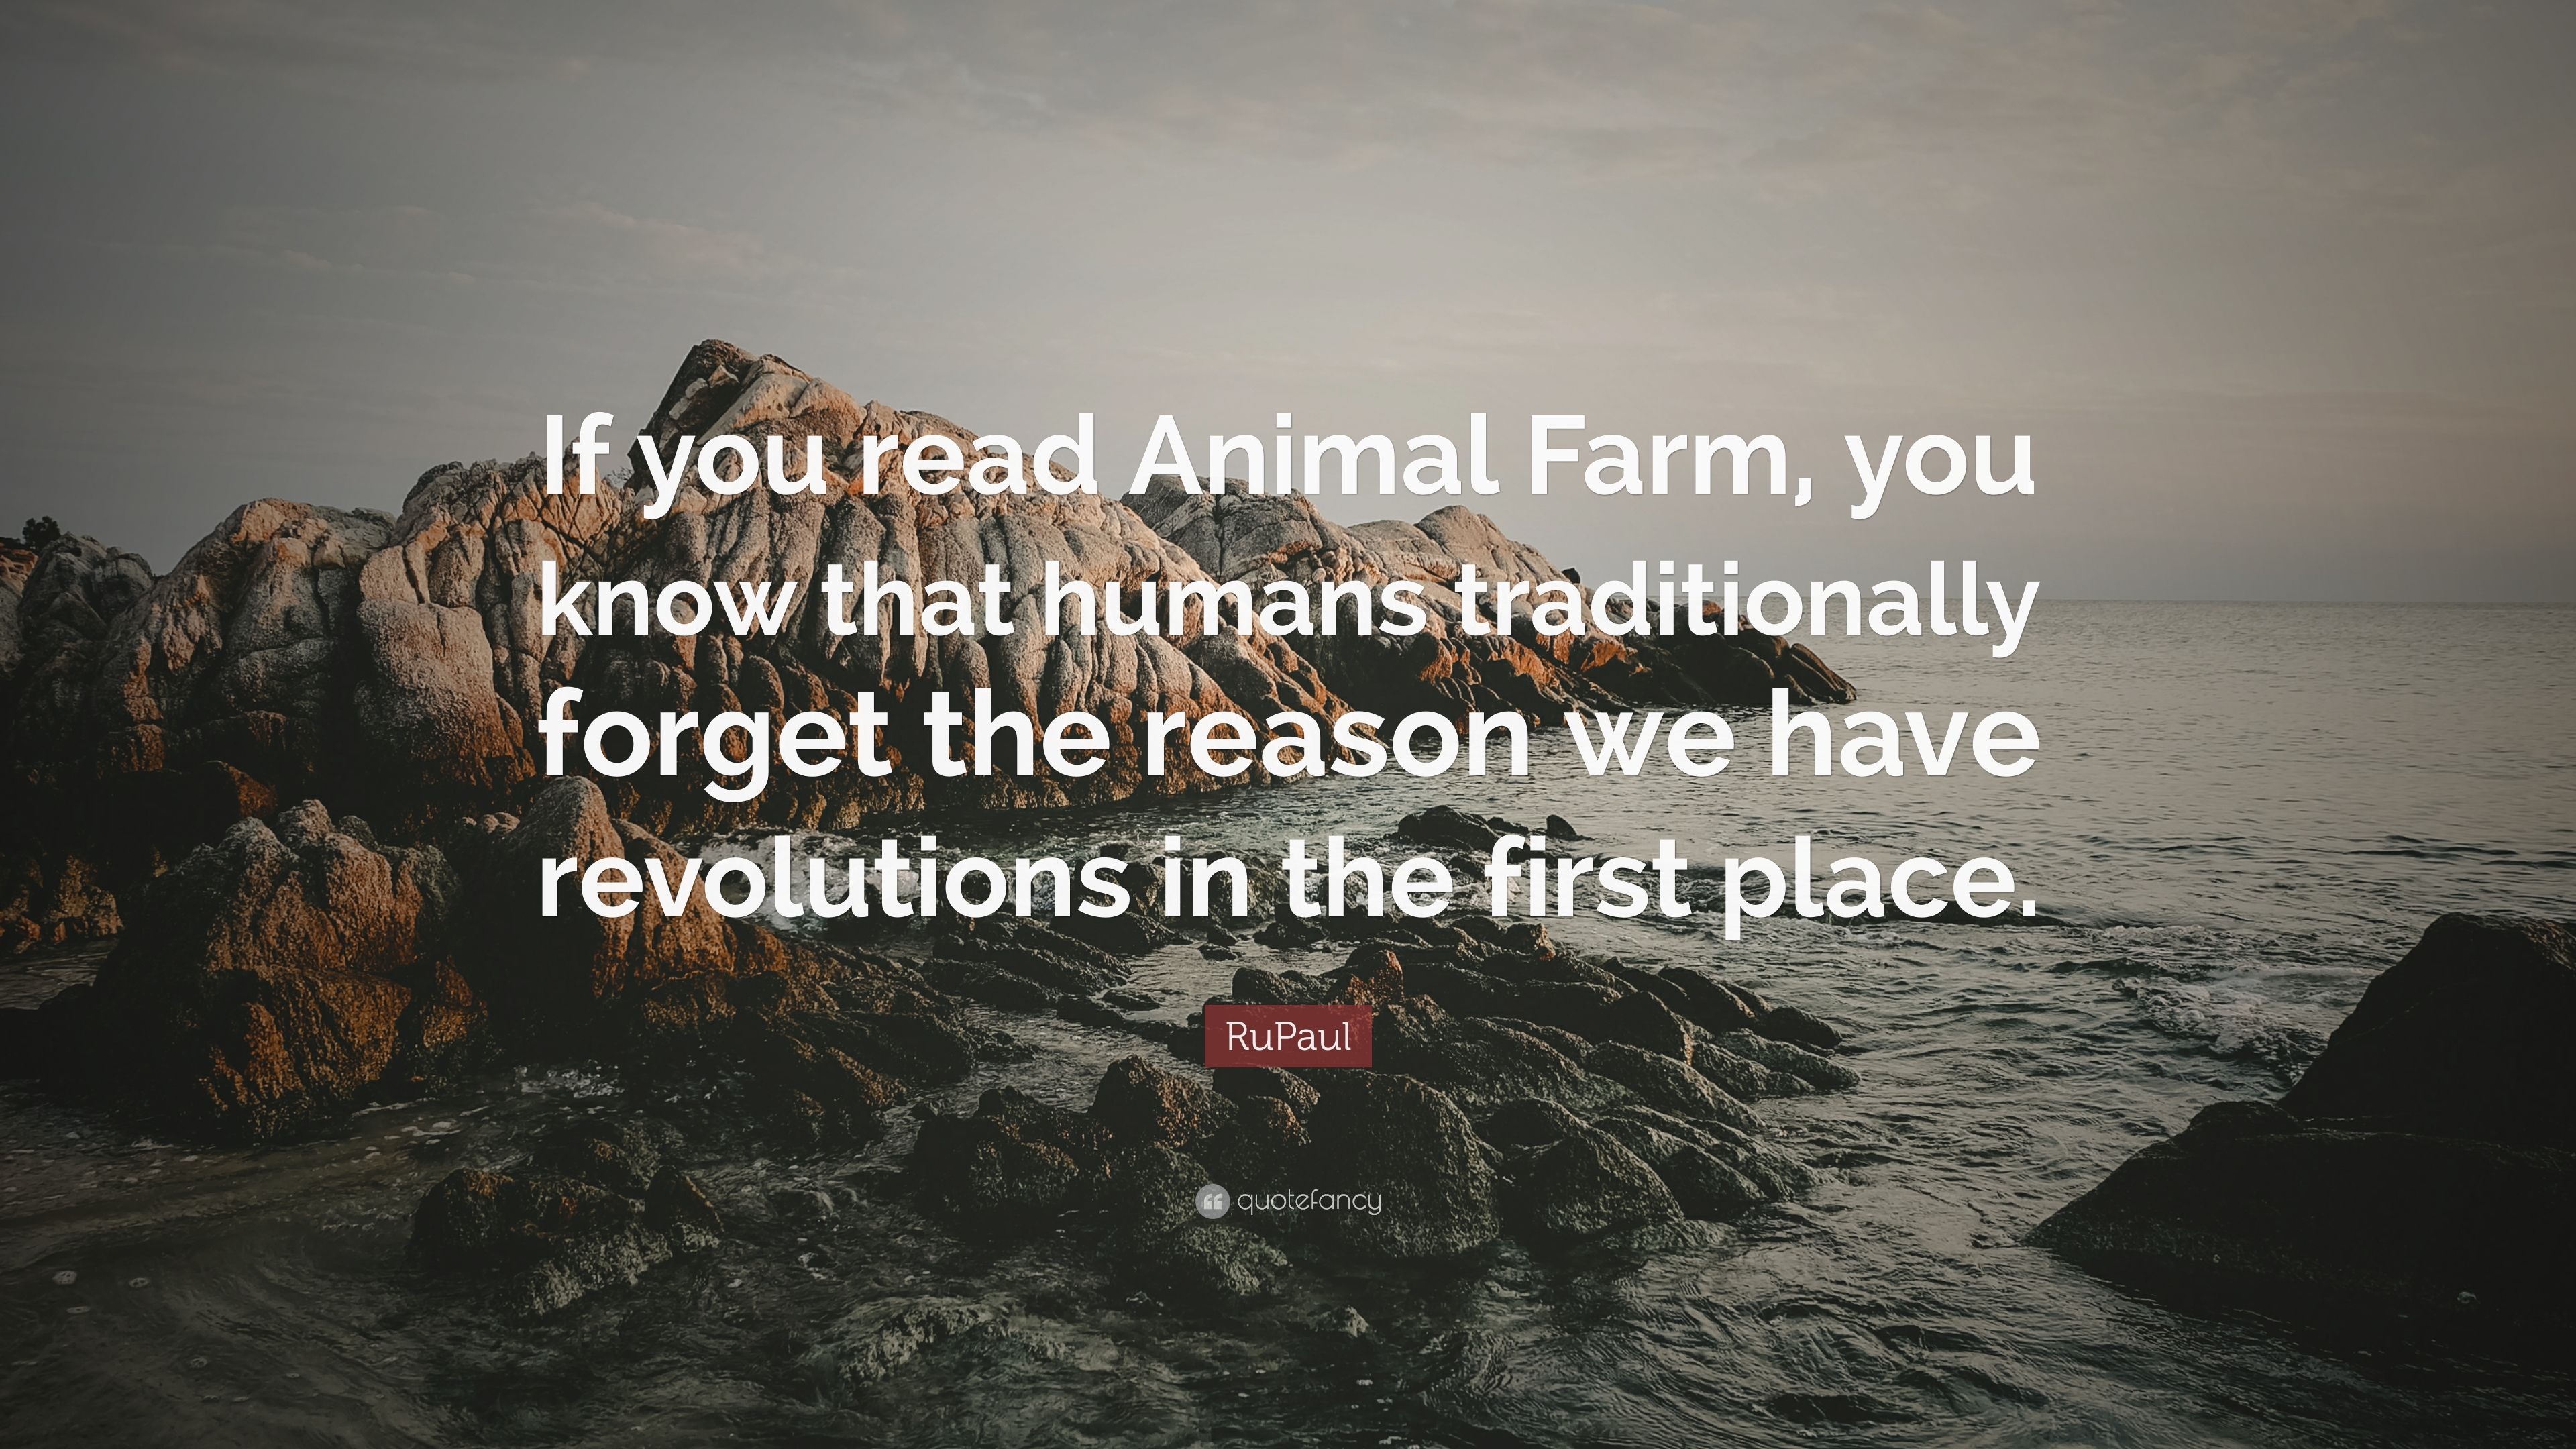 RuPaul Quote: “If you read Animal Farm, you know that humans traditionally forget the reason we have revolutions in the first place.” (7 wallpaper)